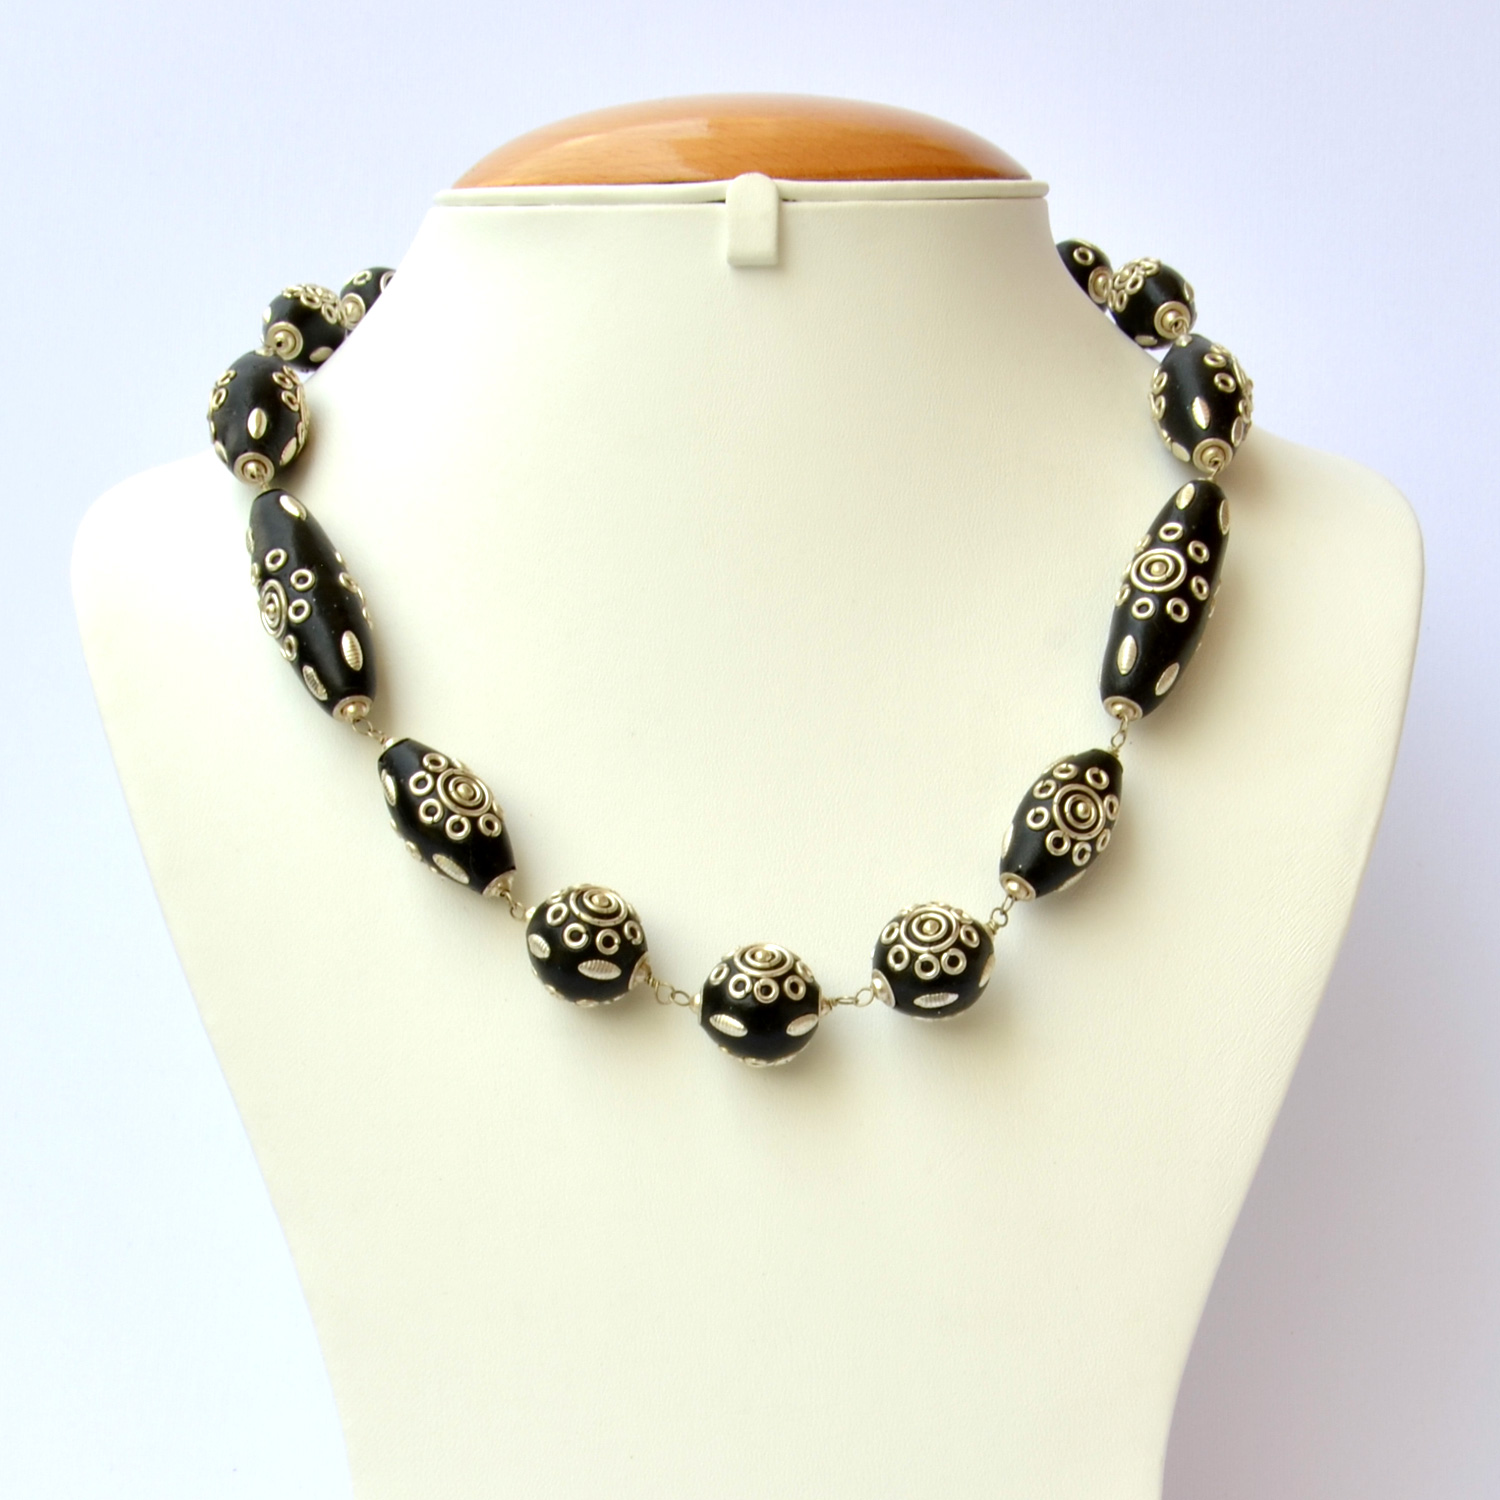 Handmade Black Necklace Studded with Beads having Metal Accessories ...